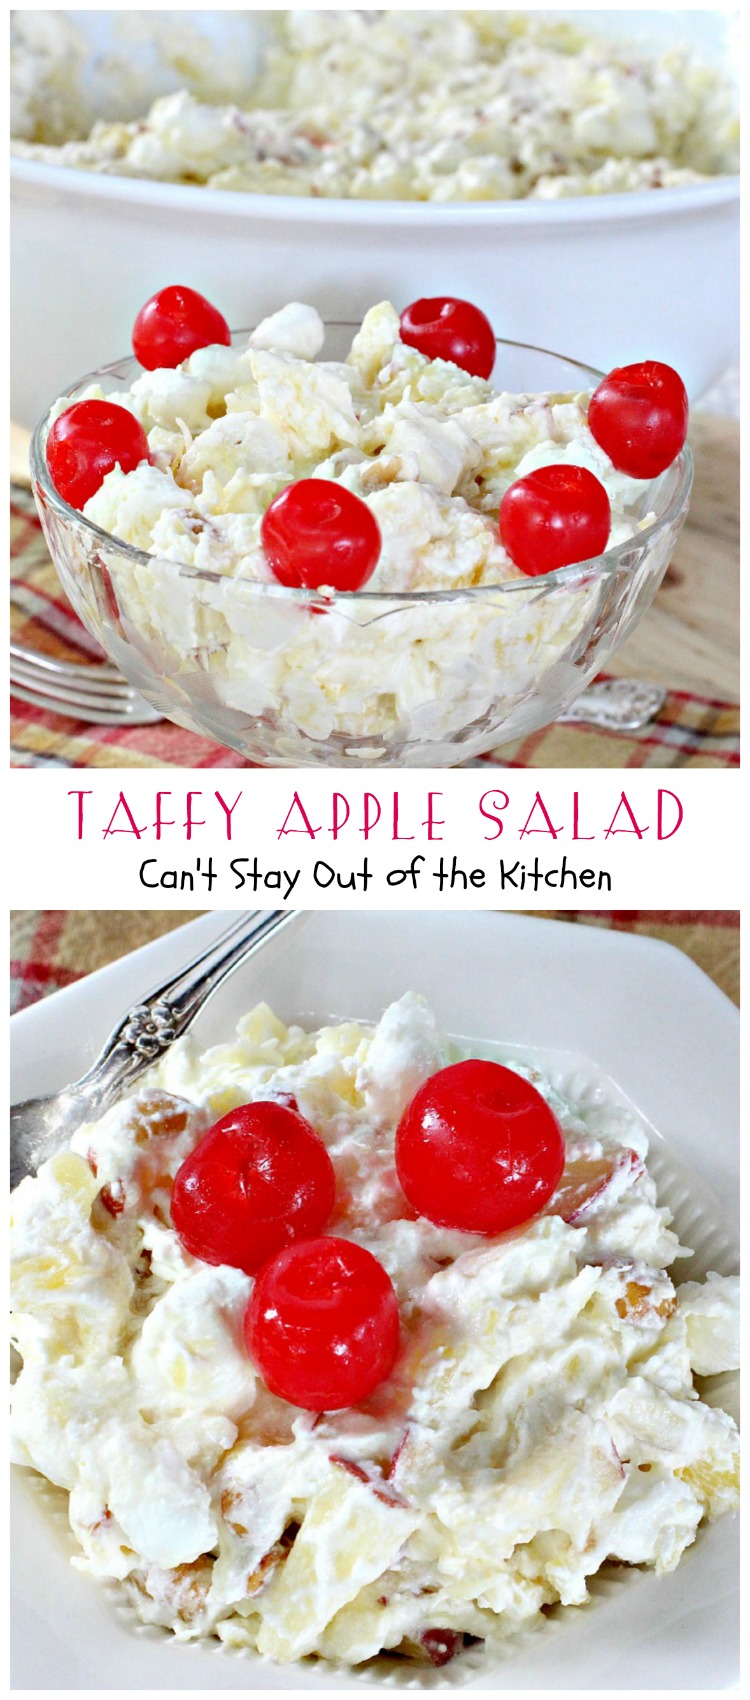 Taffy Apple Salad | Can't Stay Out of the Kitchen